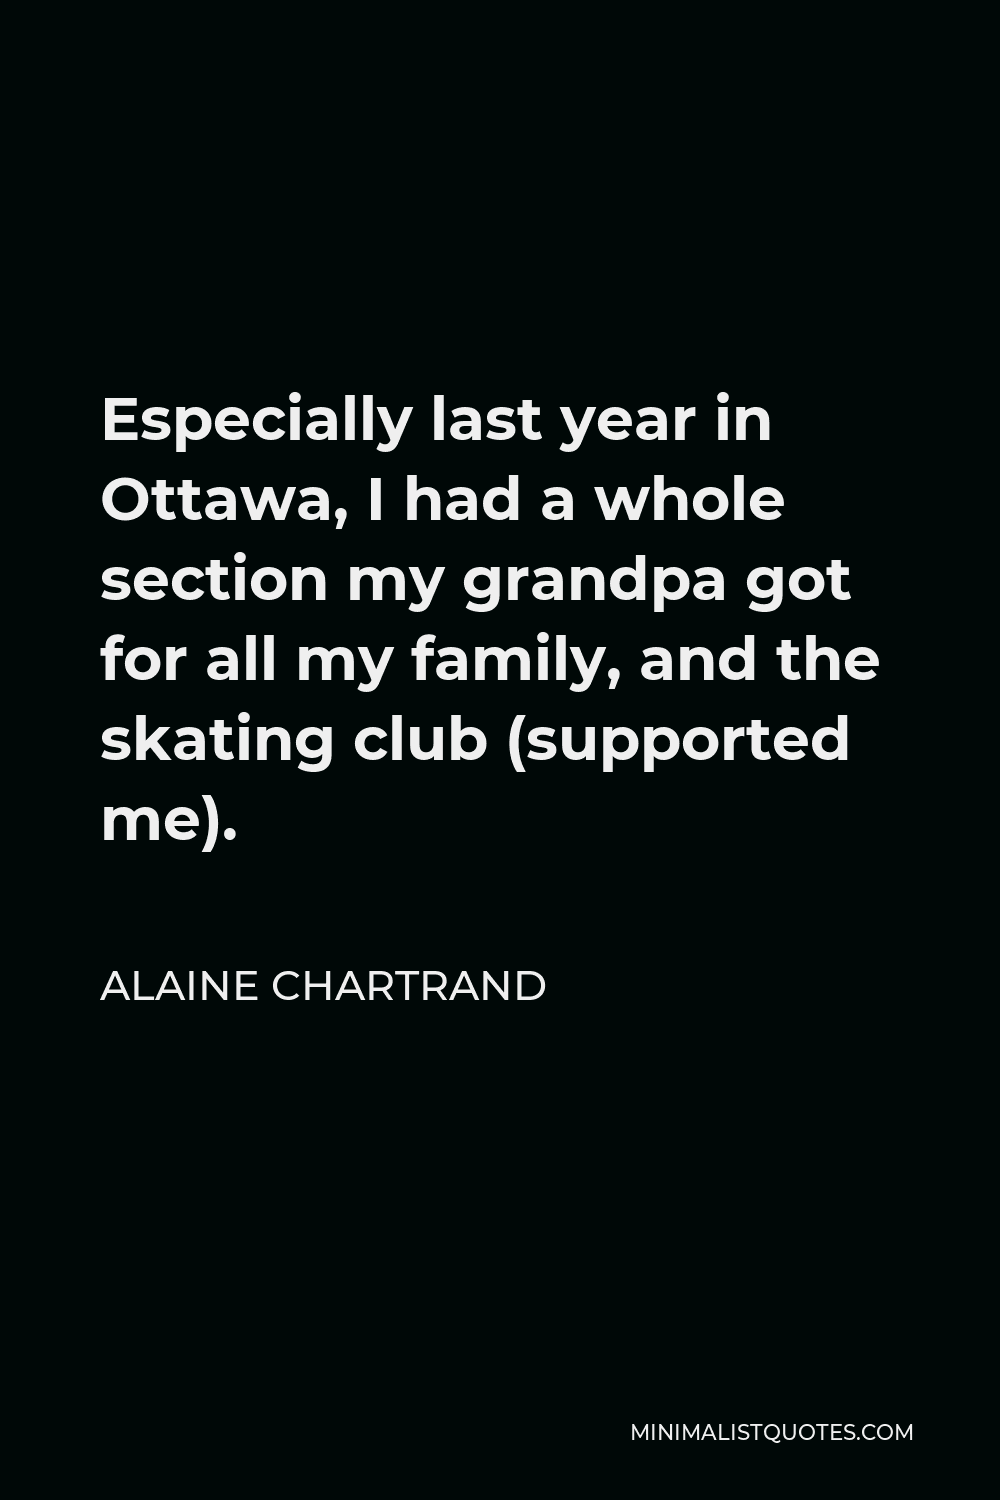 Alaine Chartrand Quote - Especially last year in Ottawa, I had a whole section my grandpa got for all my family, and the skating club (supported me).